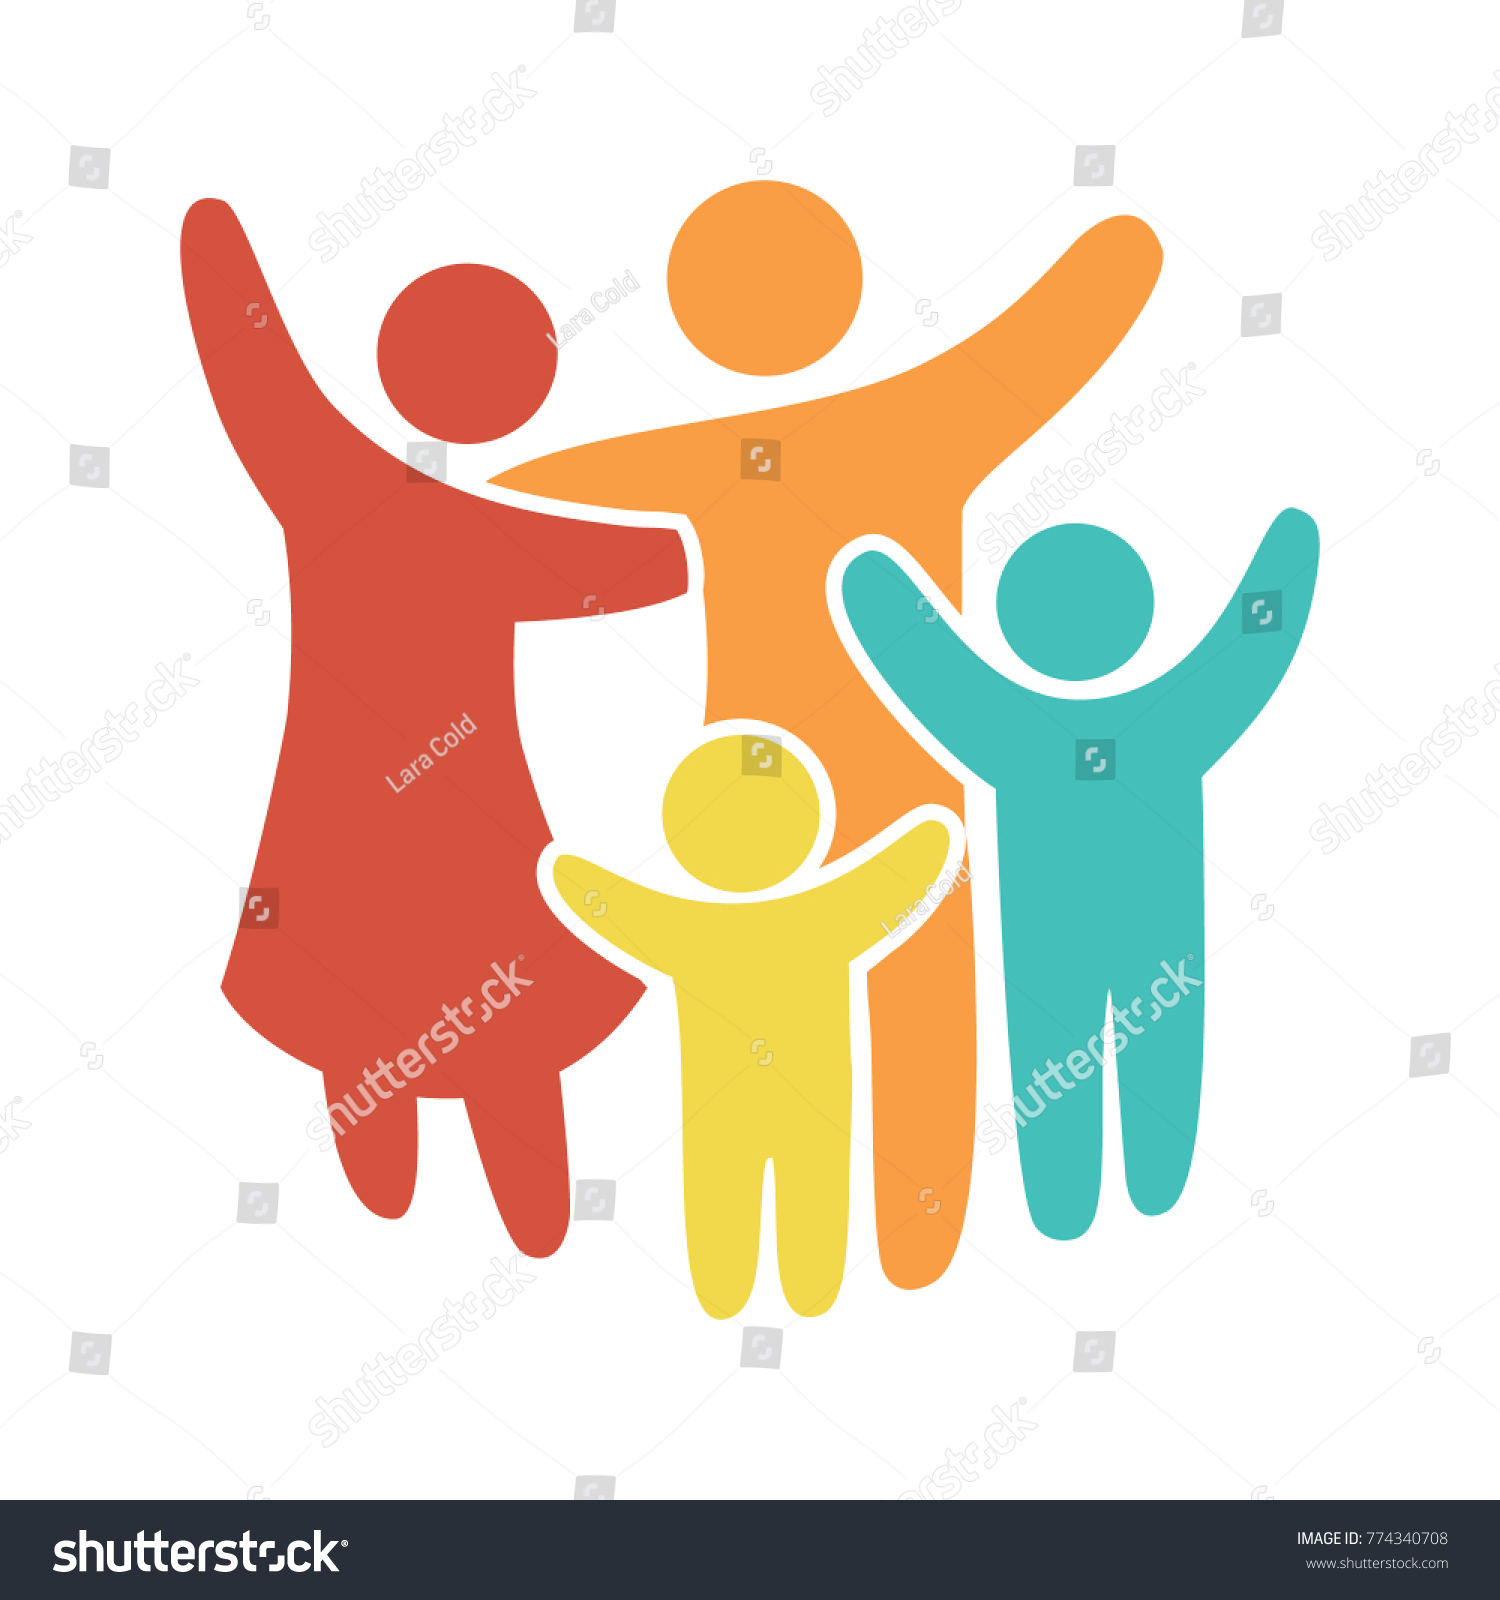 Happy family icon multicolored in simple figures. Two children, dad and mom stand together. Vector can be used as logotype. #774340708